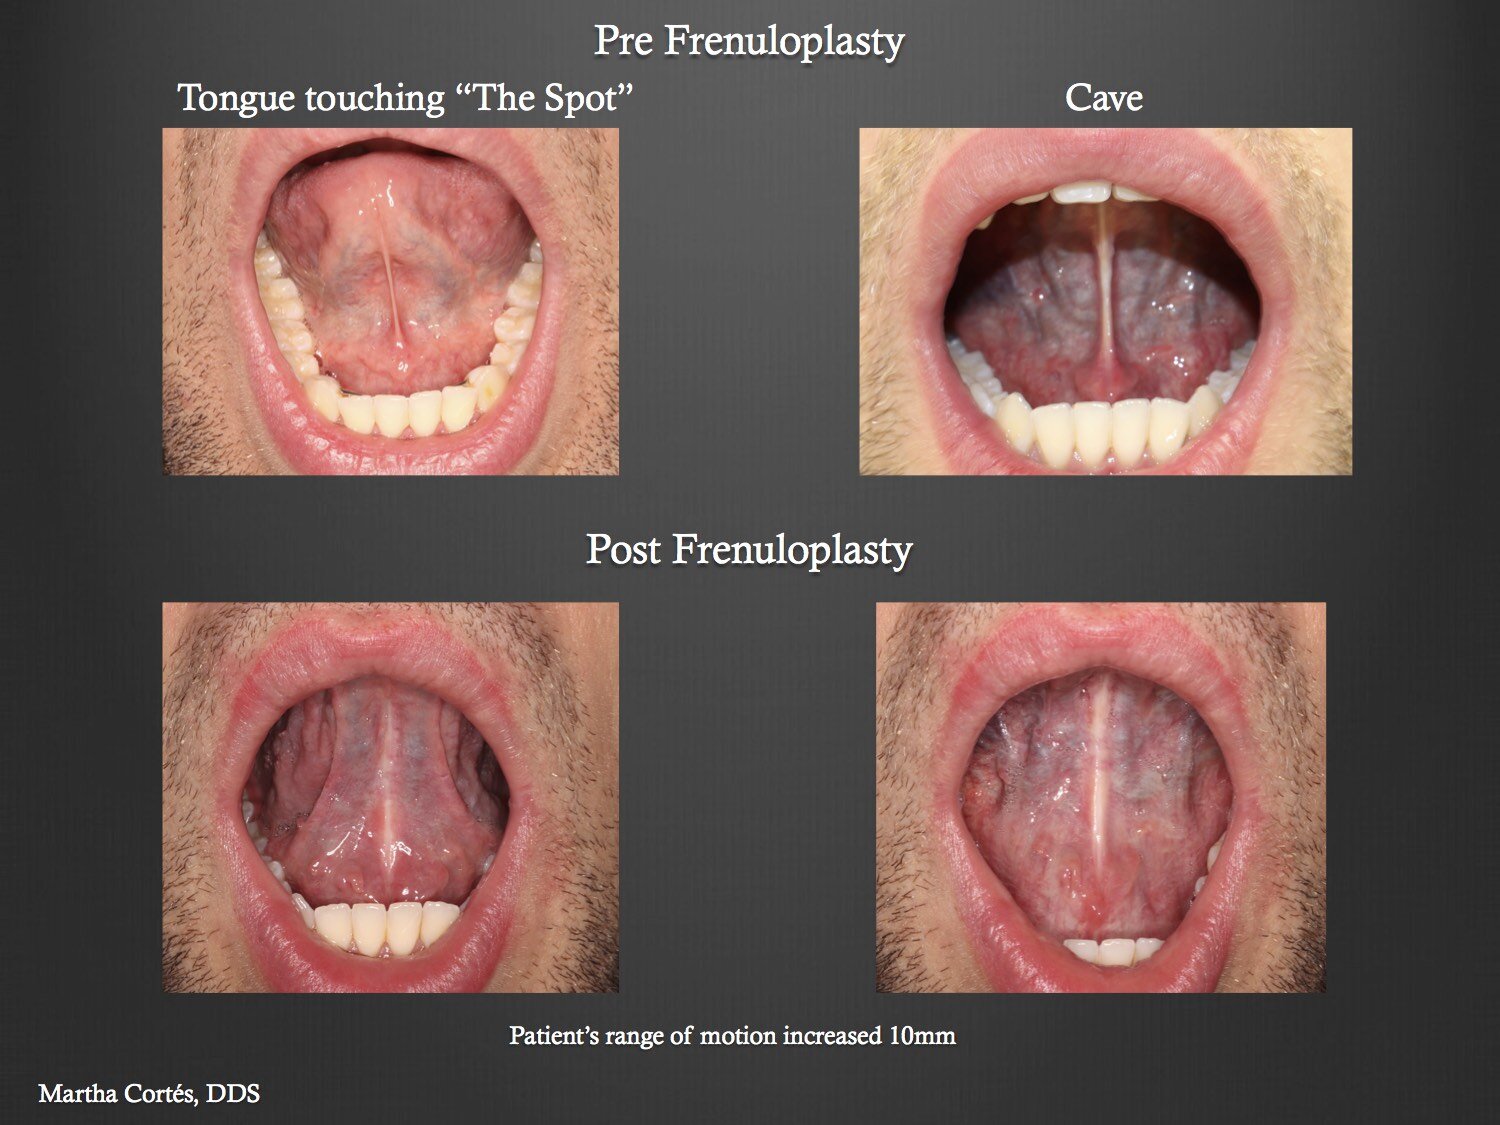  Case 2 Pre and Post tongue tie release diagnostic intra oral photos showing the changes in range of motion of the tongue 